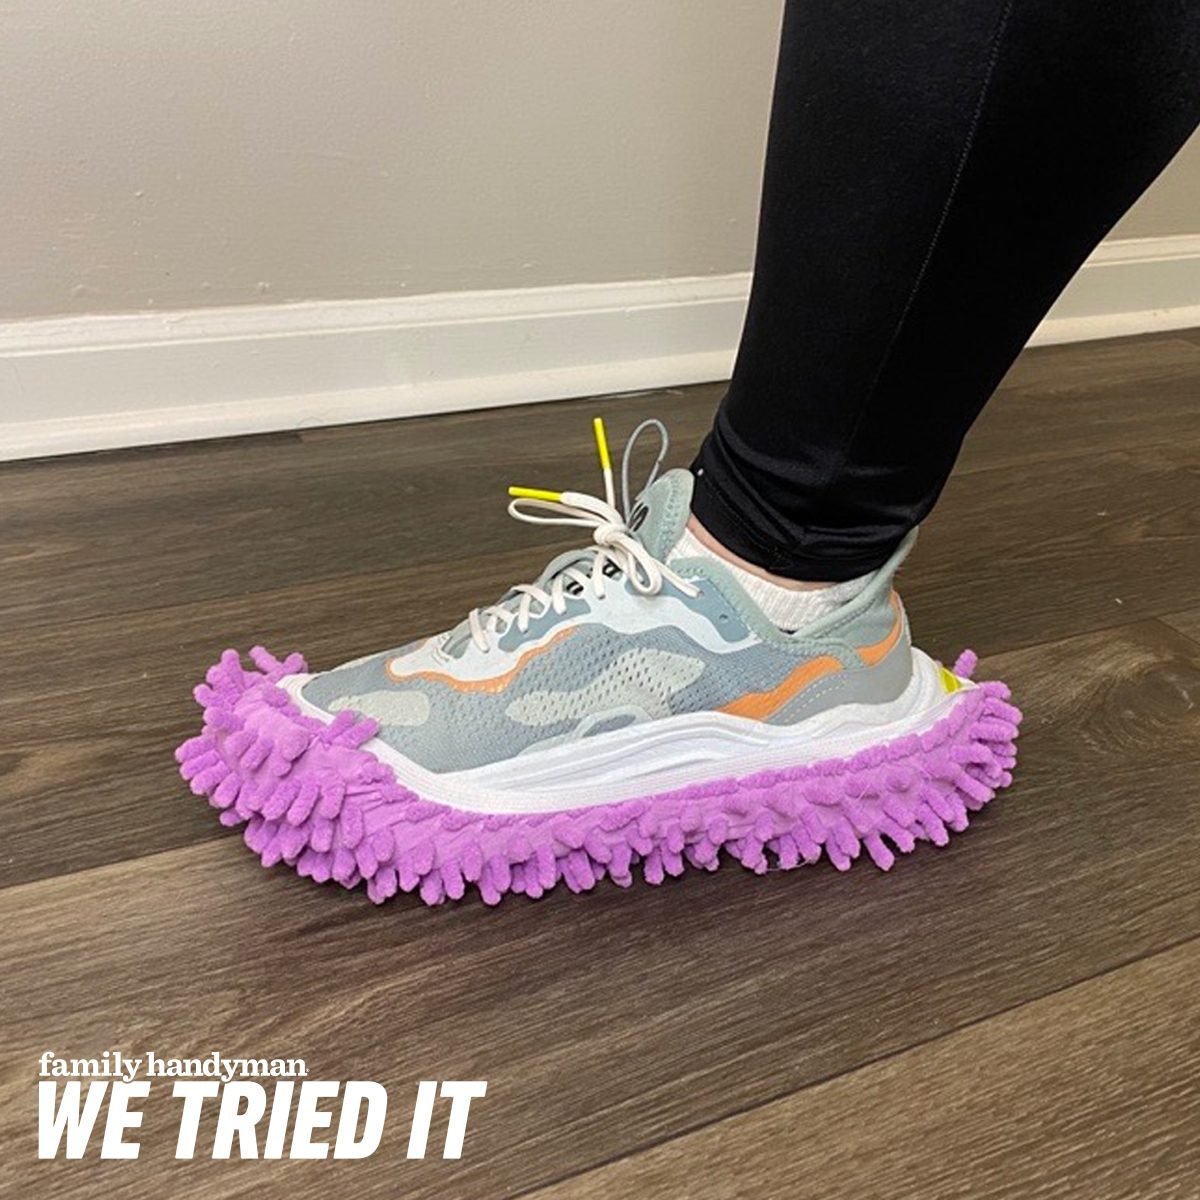 Tested: Amazon's Mop Slippers Turn Walks into Cleaning! (Honest Review)